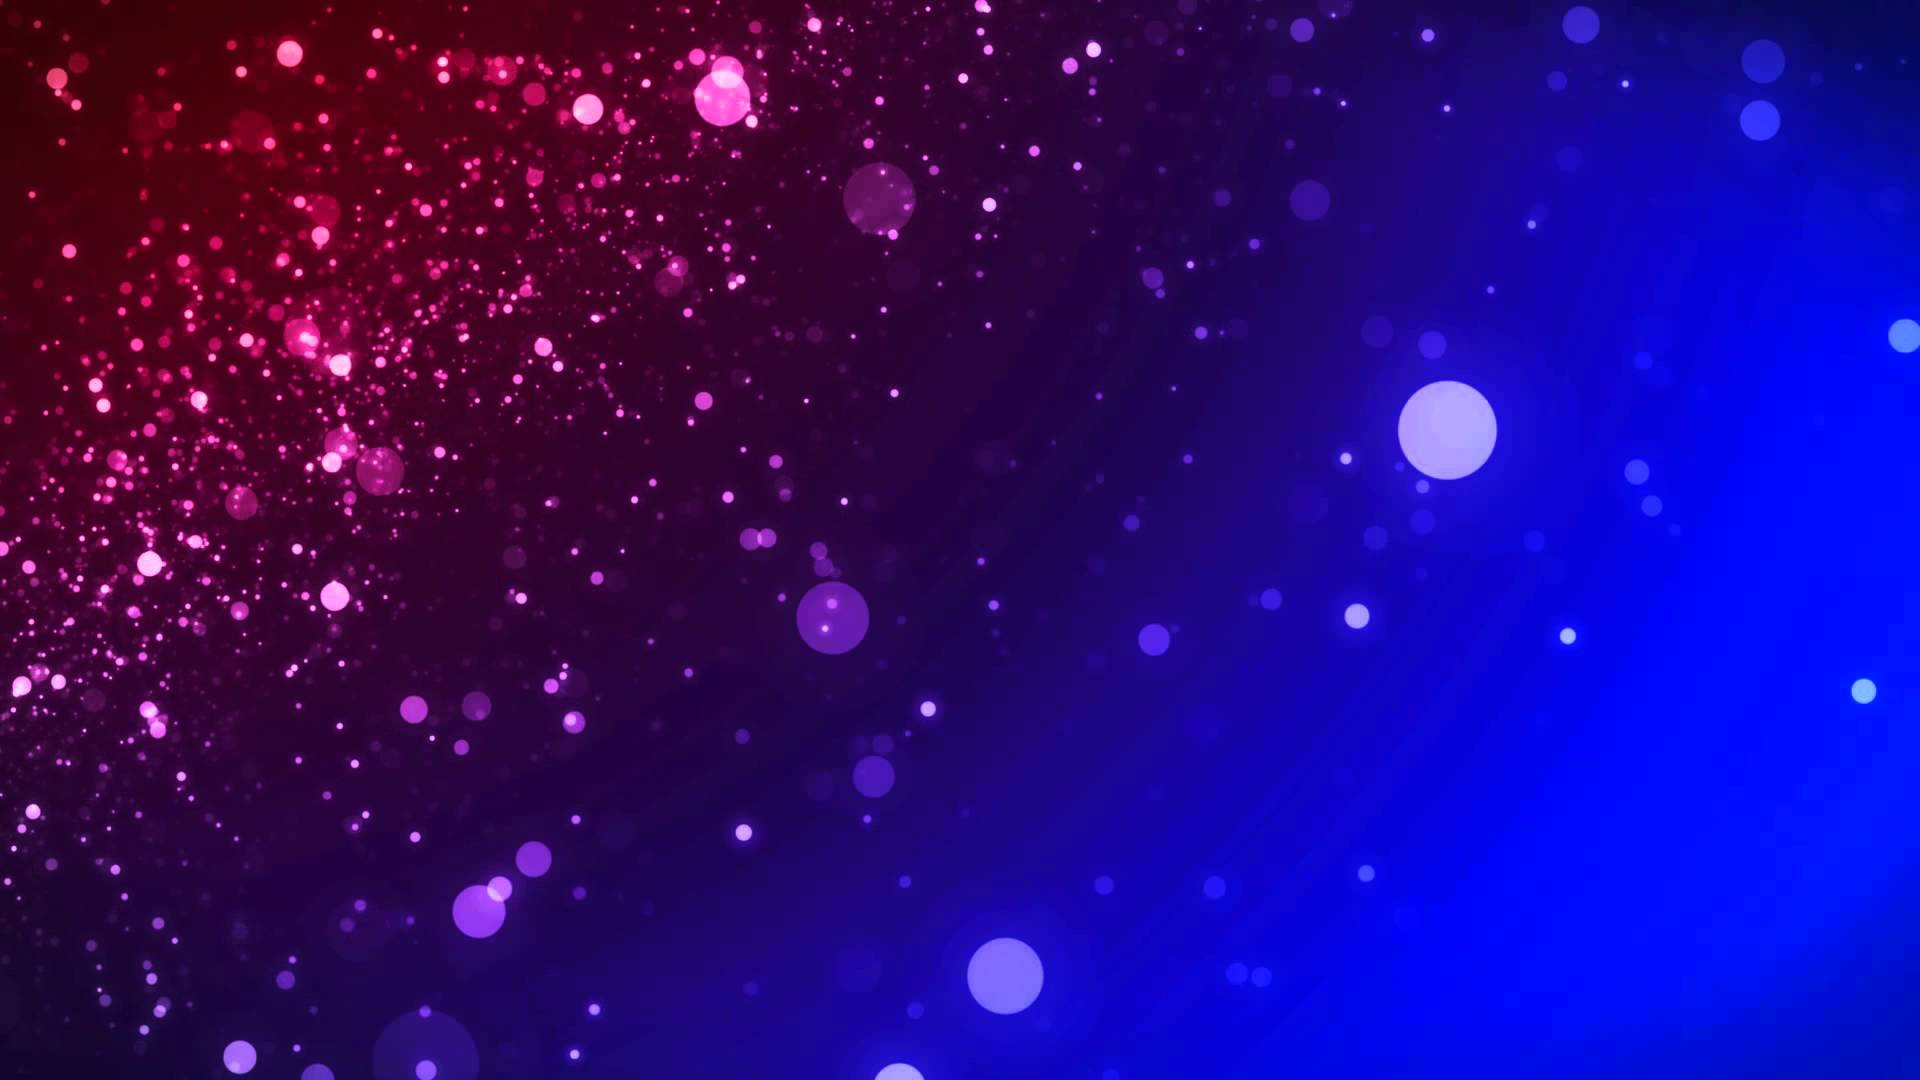 Free download FREE Motion Background Download now Free Glory [1920x1080]  for your Desktop, Mobile & Tablet | Explore 75+ Motion Wallpapers | Motion  Desktop Wallpaper, Free Motion Desktop Backgrounds, Slow Motion Wallpaper